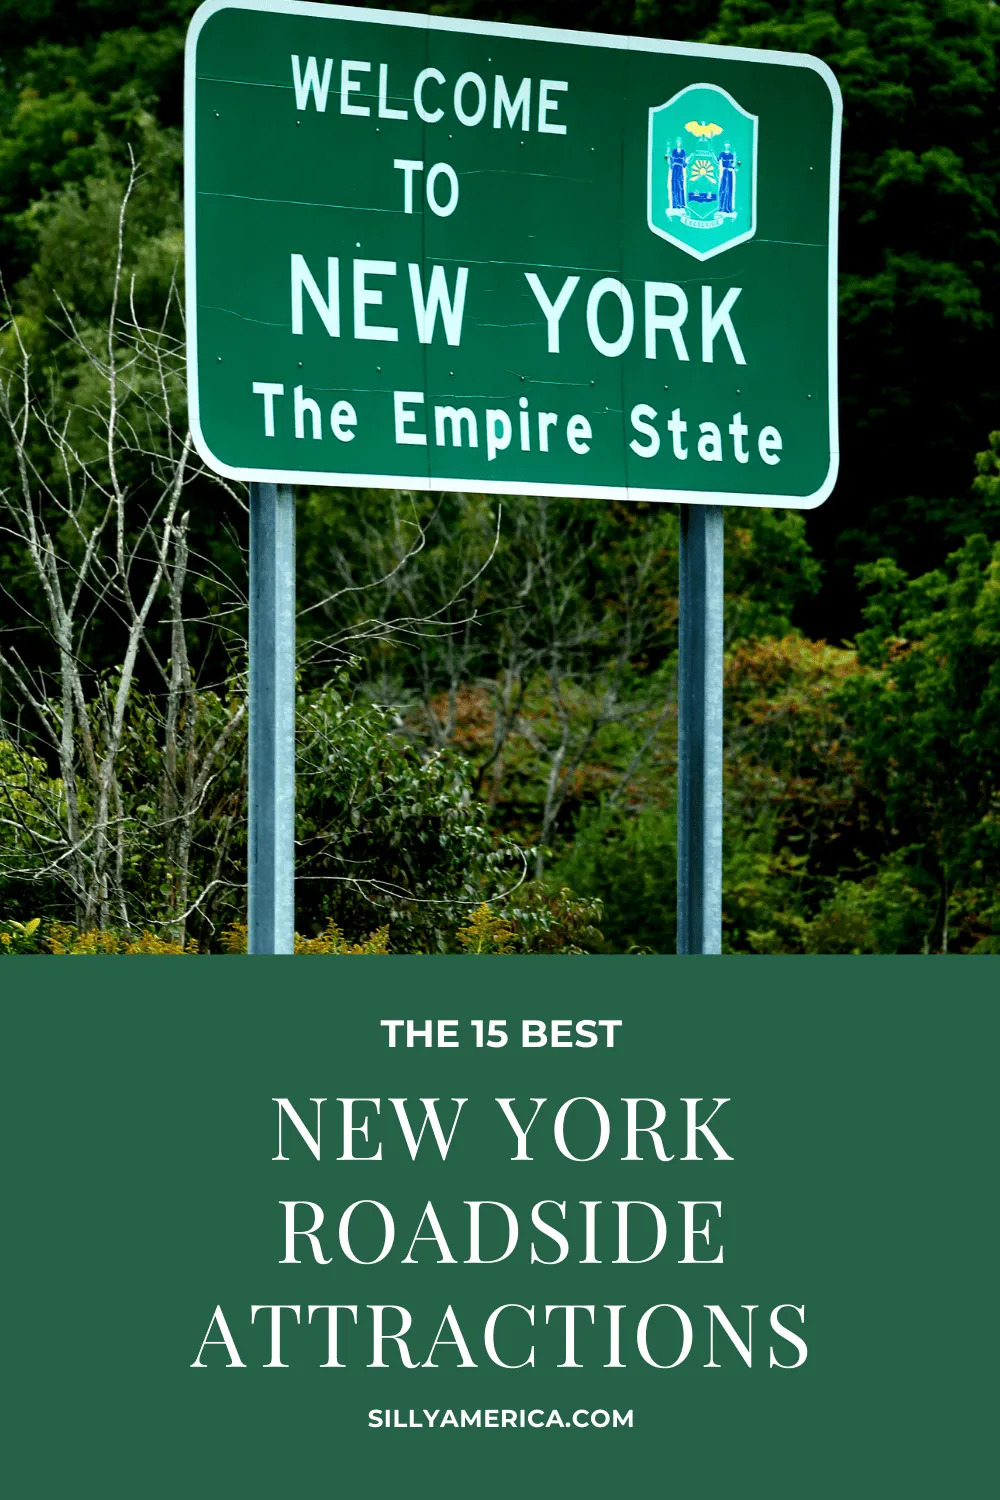 The best New York roadside attractions to visit on a New York road trip. Add these roadside oddities to your travel bucket list, itinerary, or route map! Visit these weird roadside attractions on a New York state road trip with kids or adults. #NewYorkRoadsideAttractions #NewYorkRoadsideAttraction #RoadsideAttractions #RoadsideAttraction #RoadTrip #NewYorkRoadTrip #NewYorkRoadTripBucketLists #NewYorkBucketLists #UpstateNewYorkRoadTrip #ThingsToDoInNewYork #NewYorkRoadTripWithKids